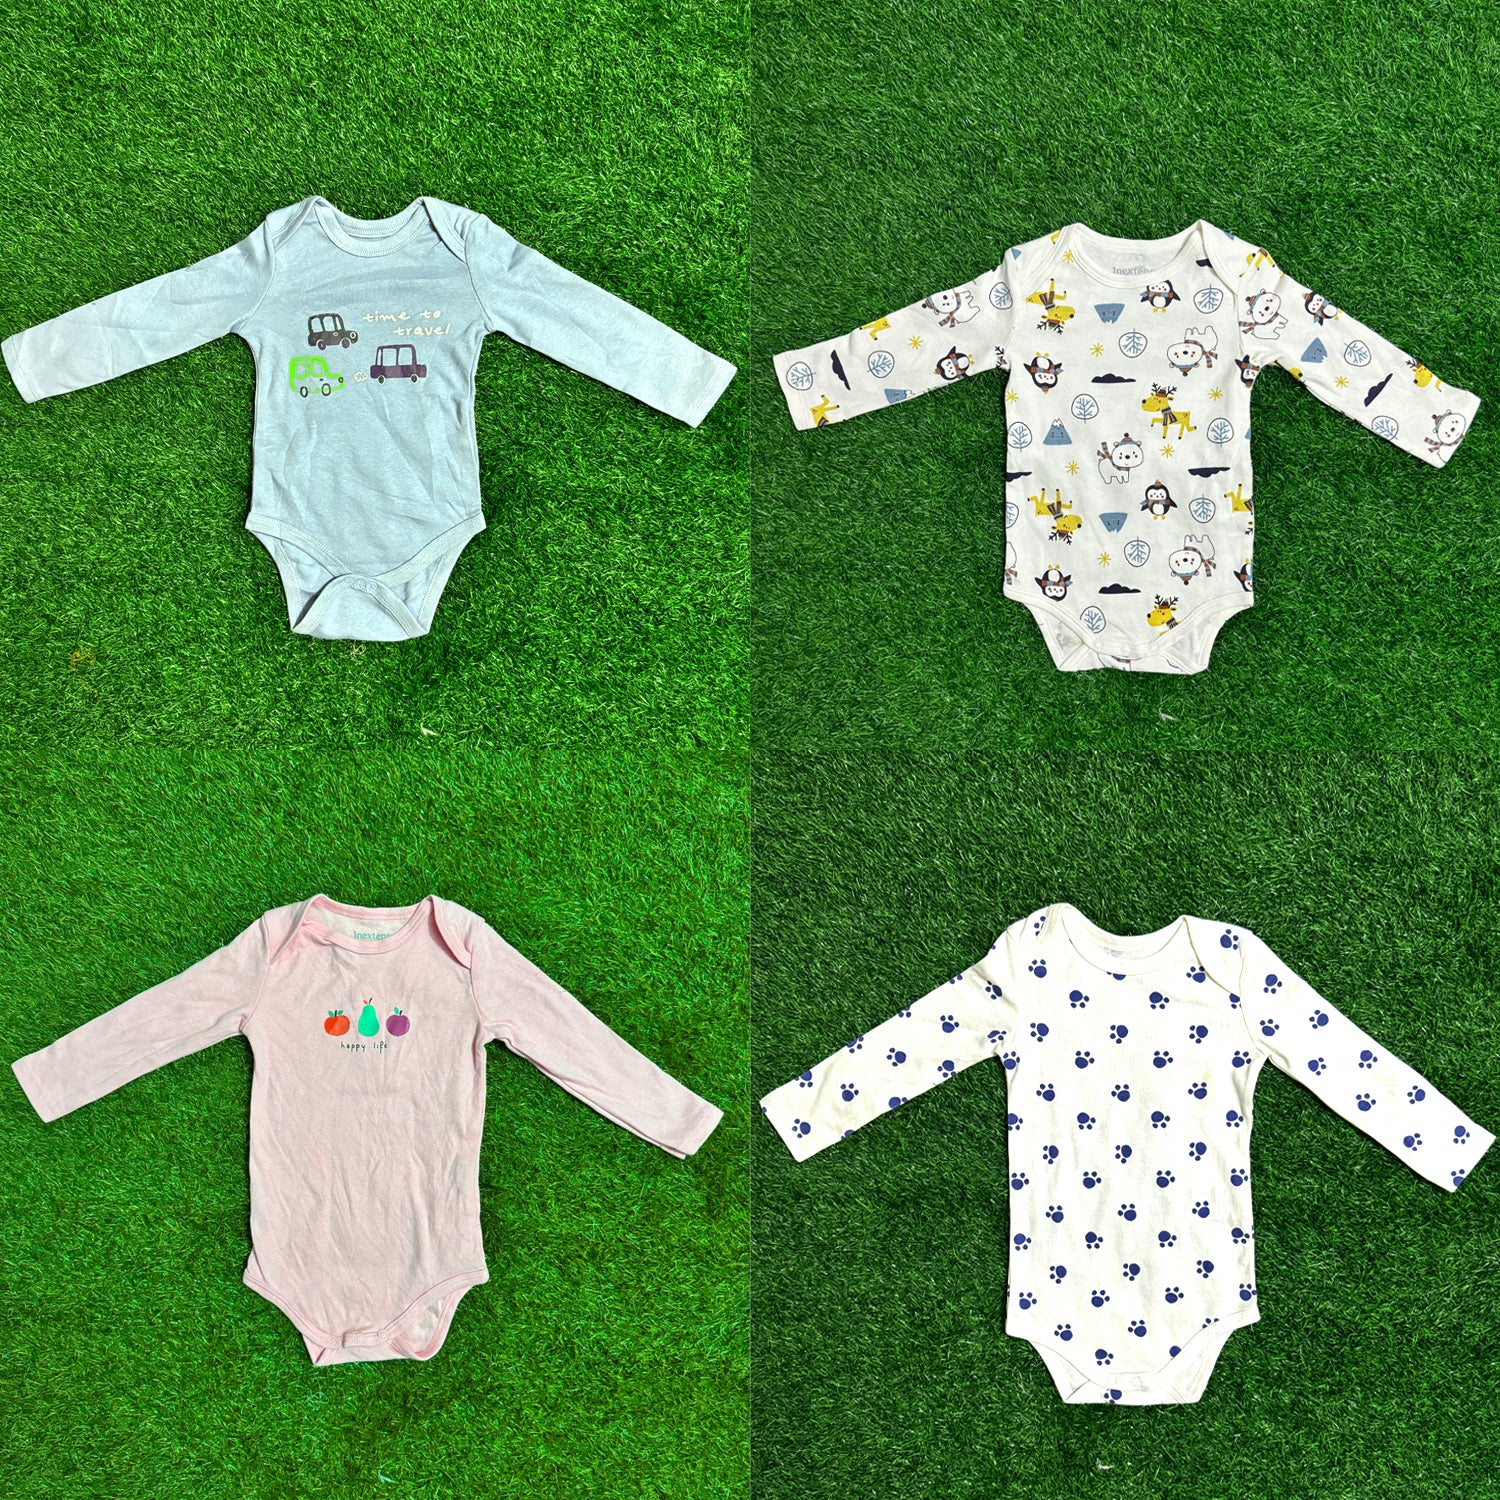 10 Pcs Baby Keeper Combo (5 Pcs Half Sleeve & 5 Pcs Full Sleeve Baby Keeper/Romper for 0 to 36 month)